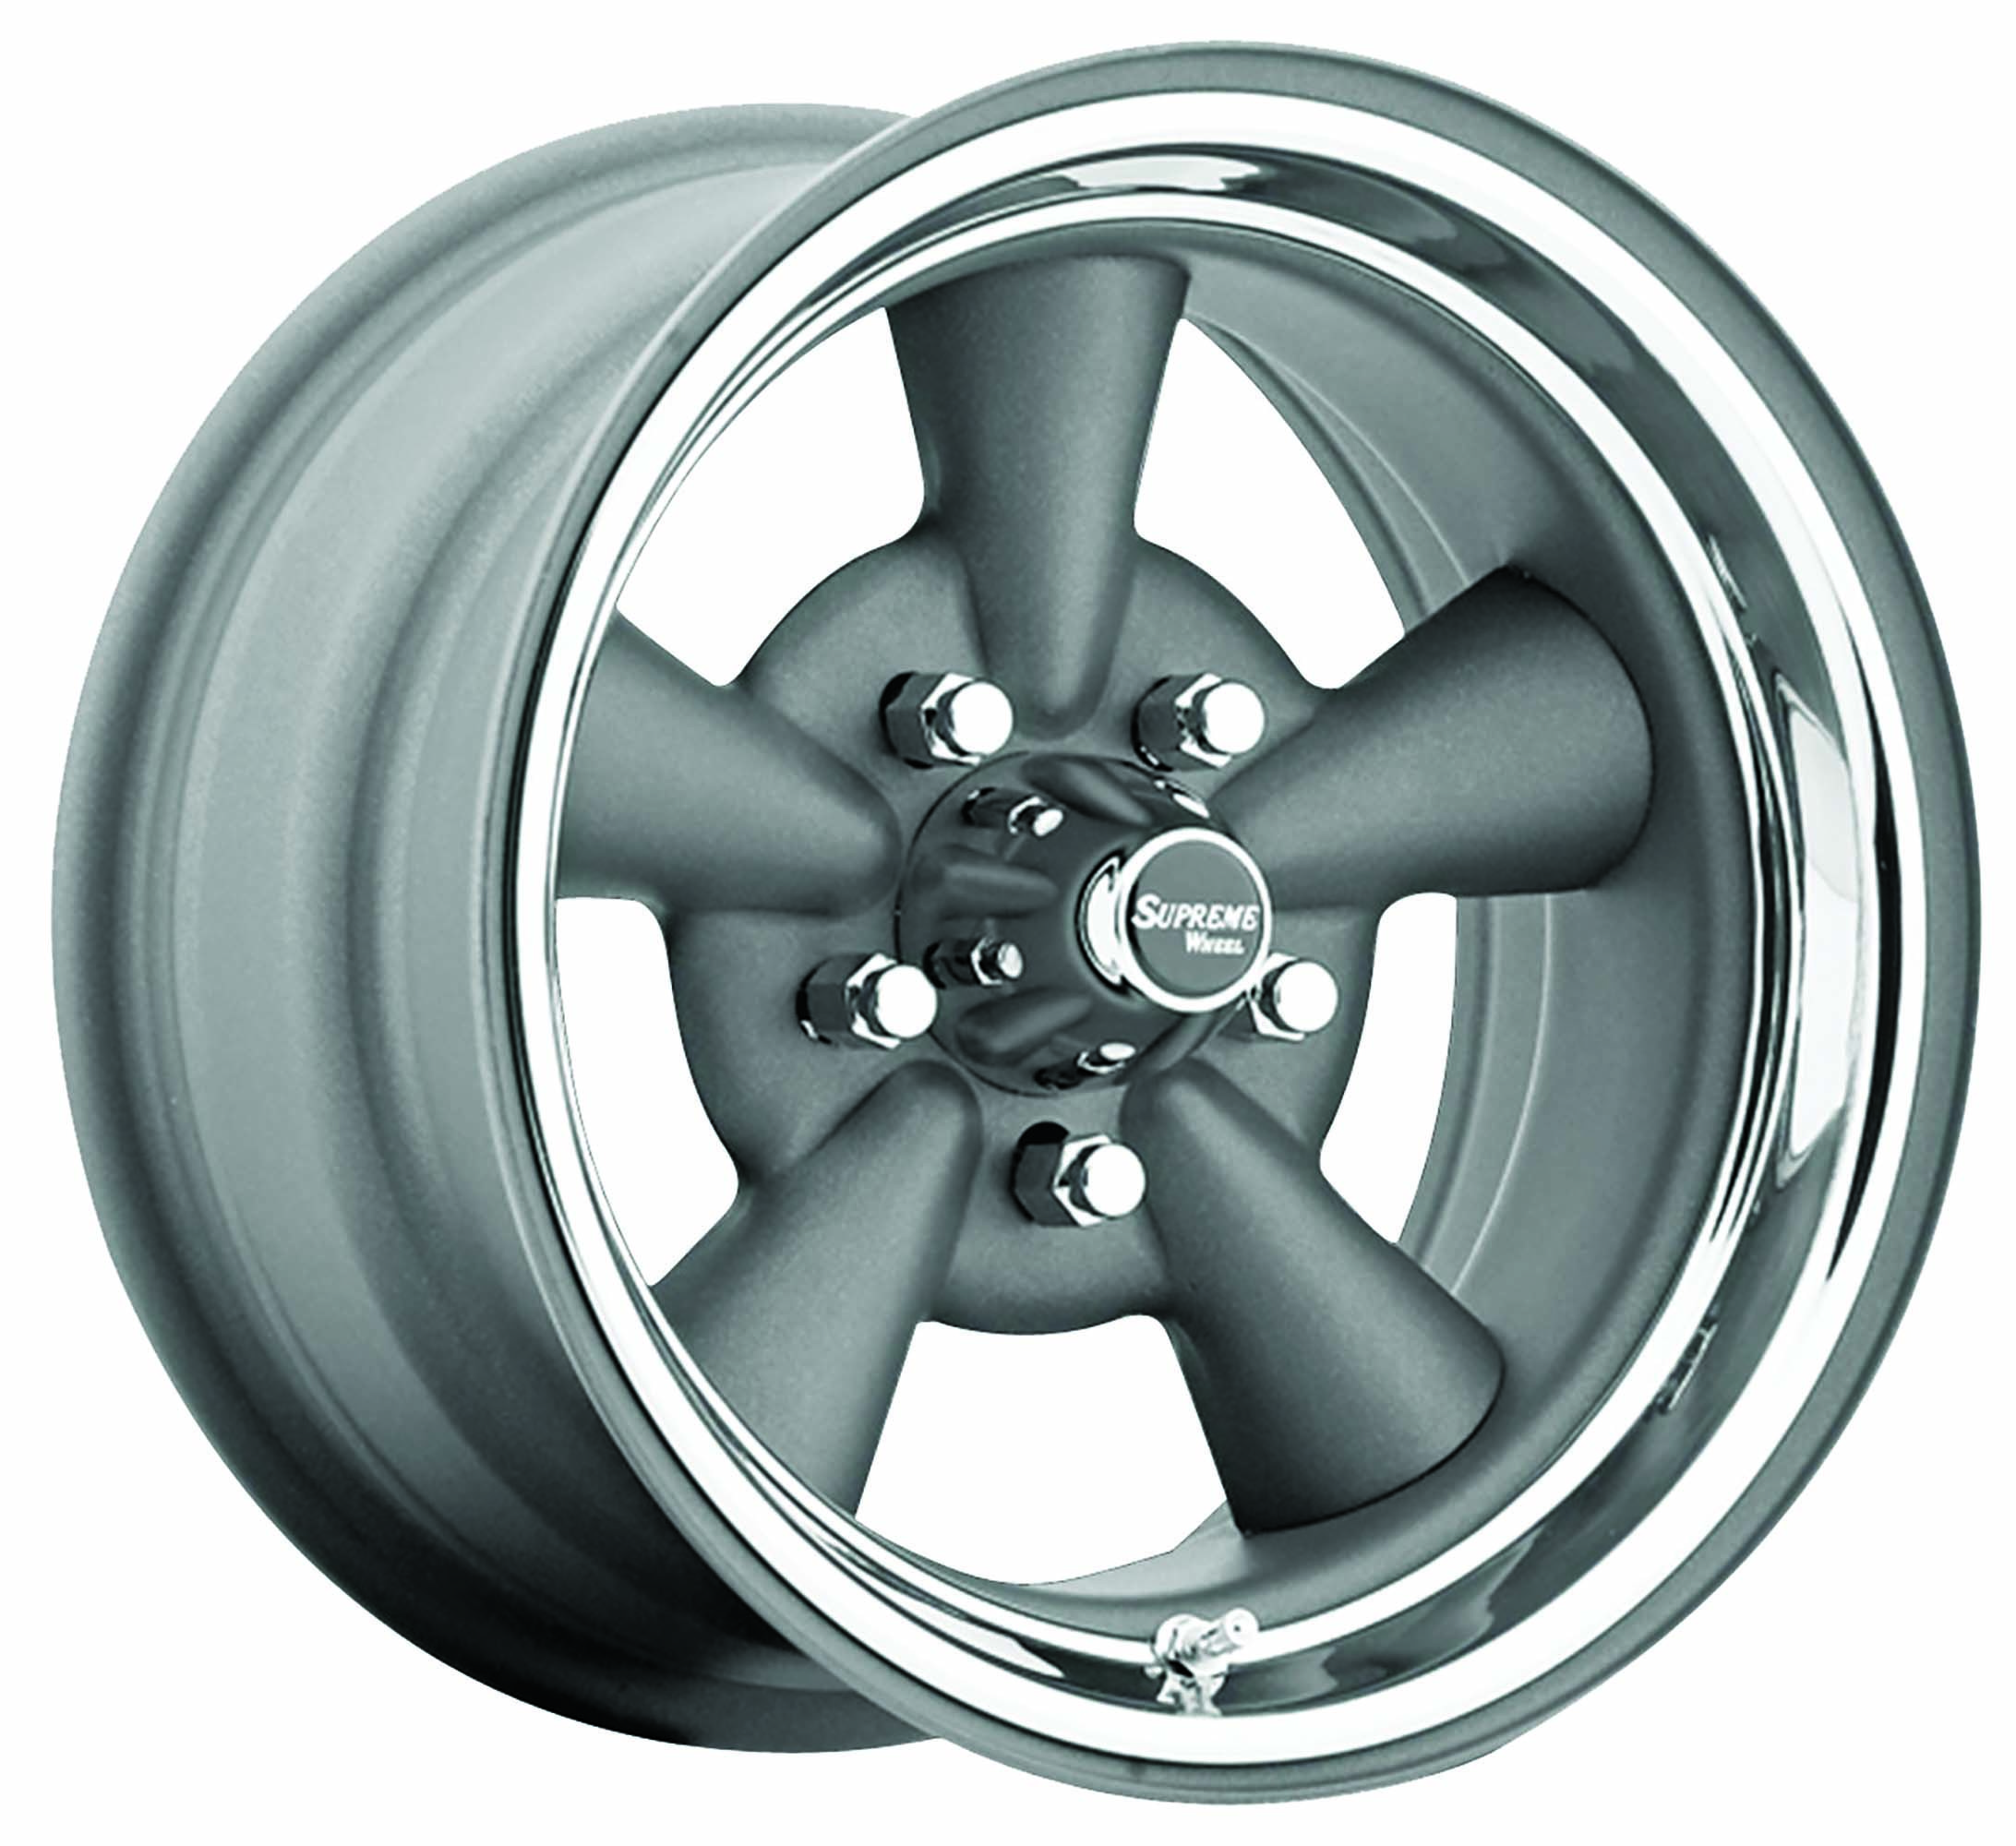 New Products For Your Muscle Car: Wheels, Tools And More